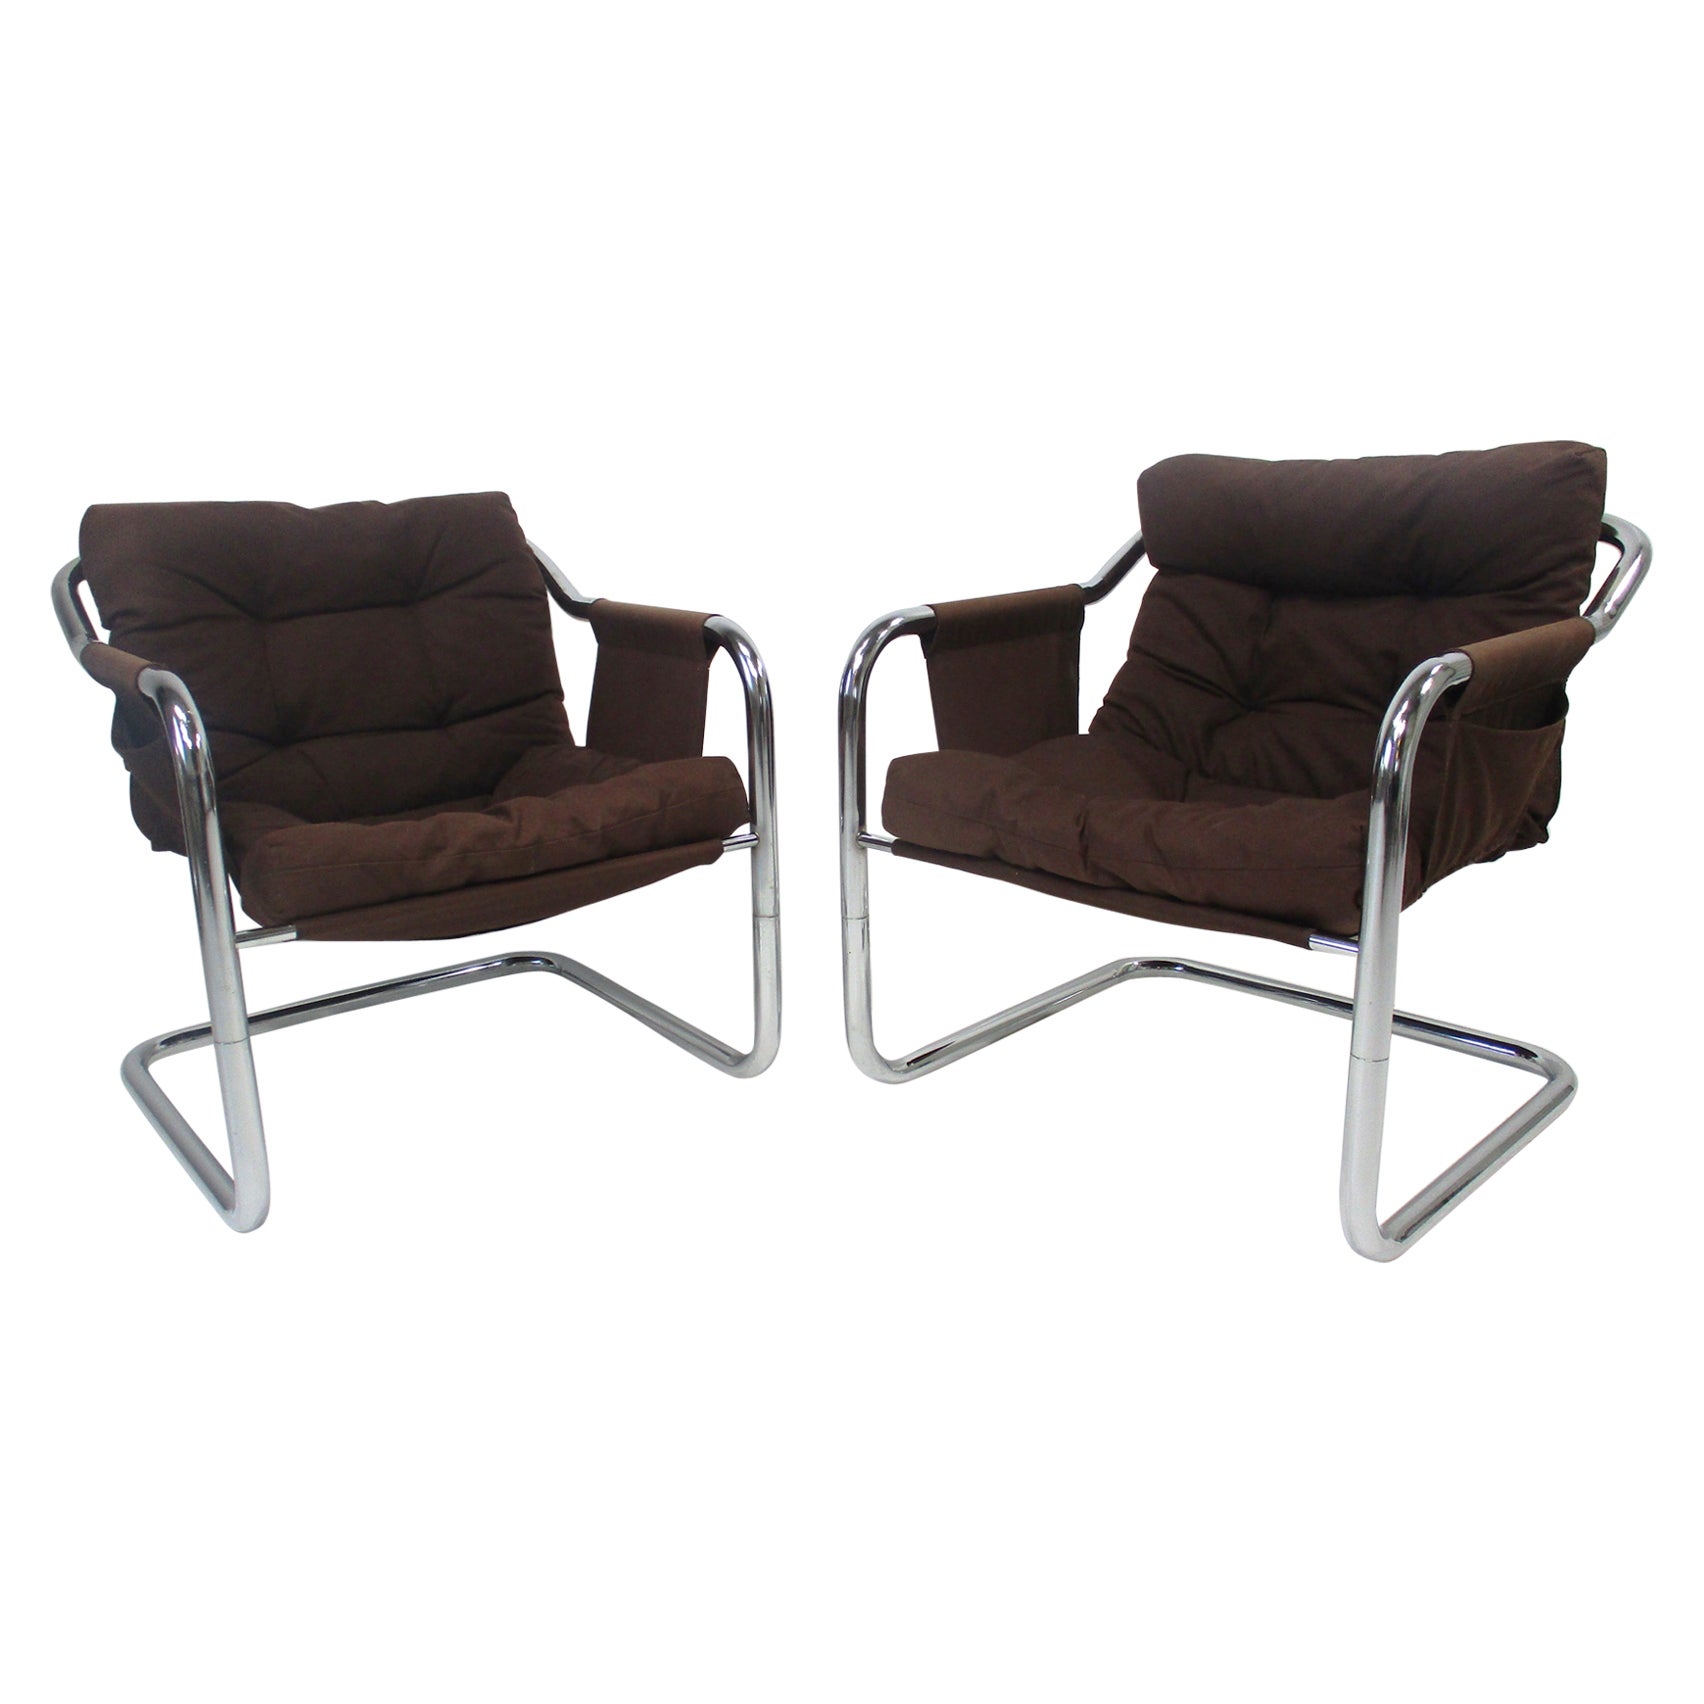 Danish Cantilevered Chrome Sling Lounge Chairs  For Sale